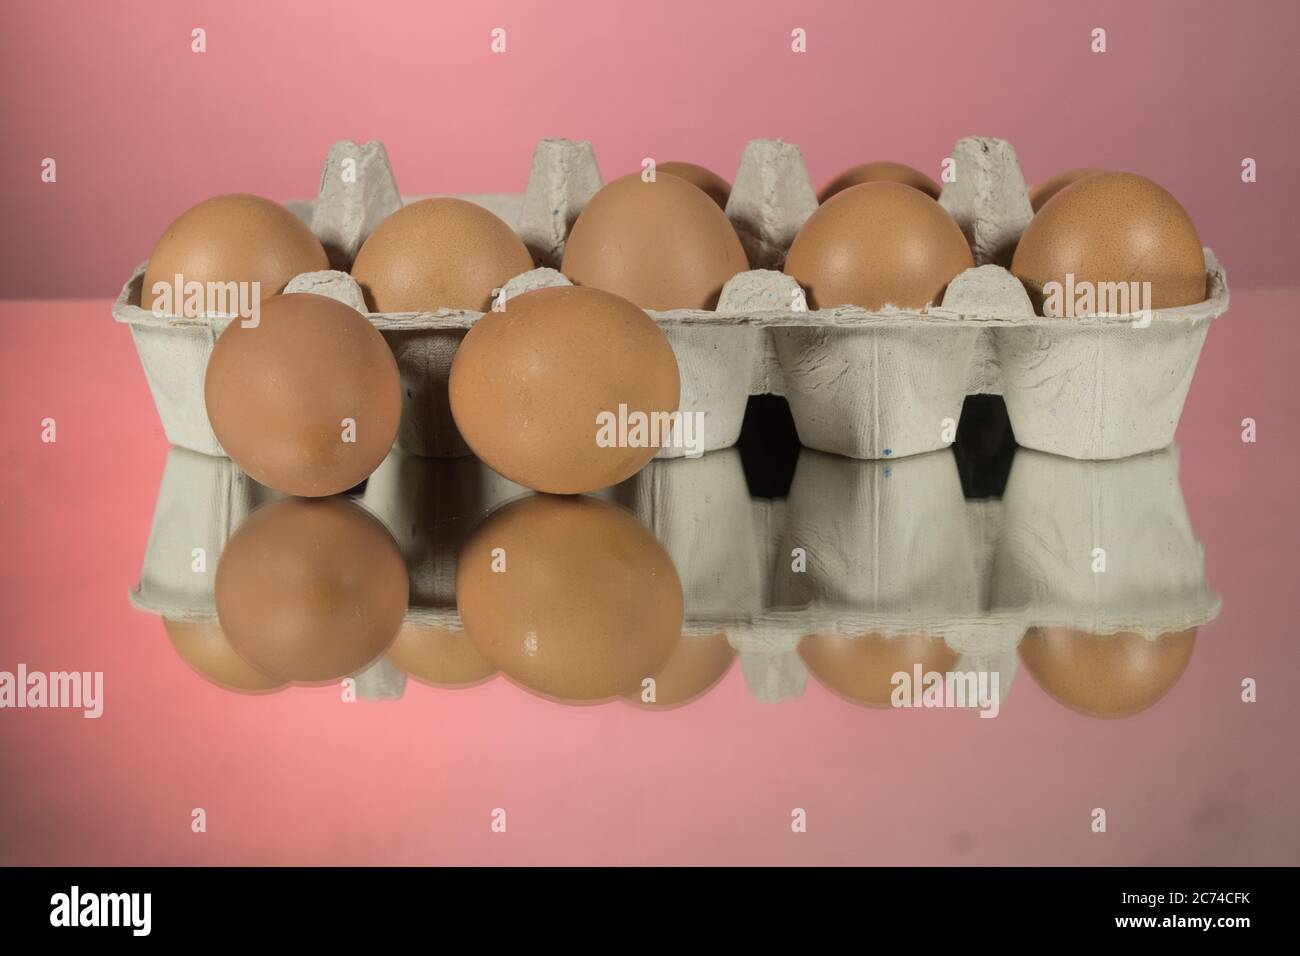 Closeup Eggs with the blue refrigerator 's tray on black mirror background Stock Photo